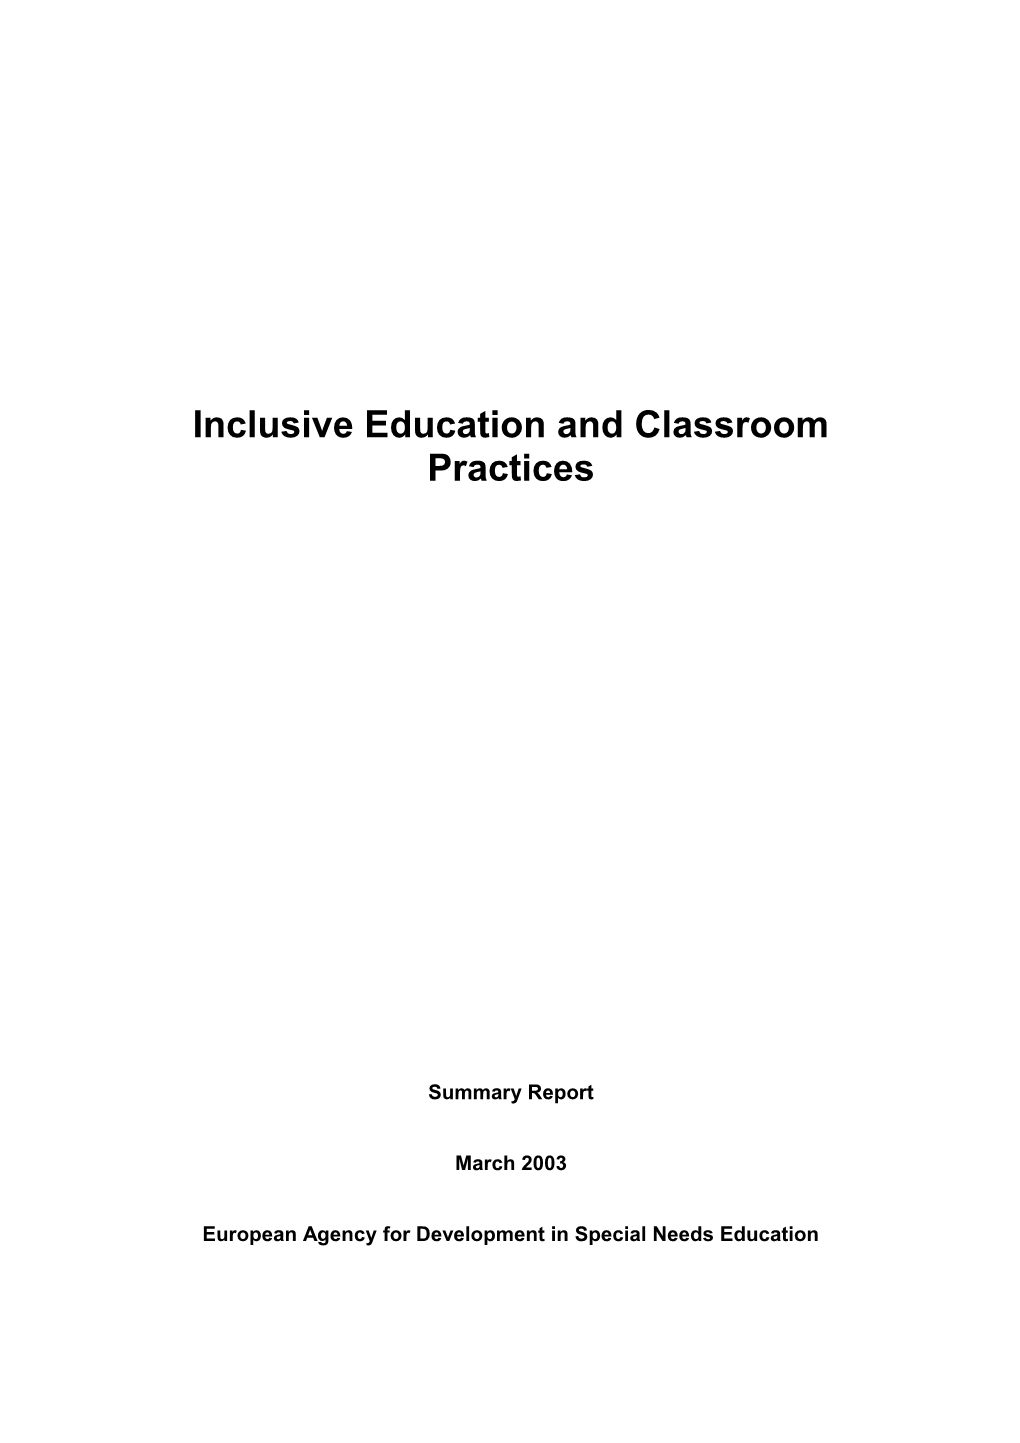 Inclusive Education and Effective Classroom Practices